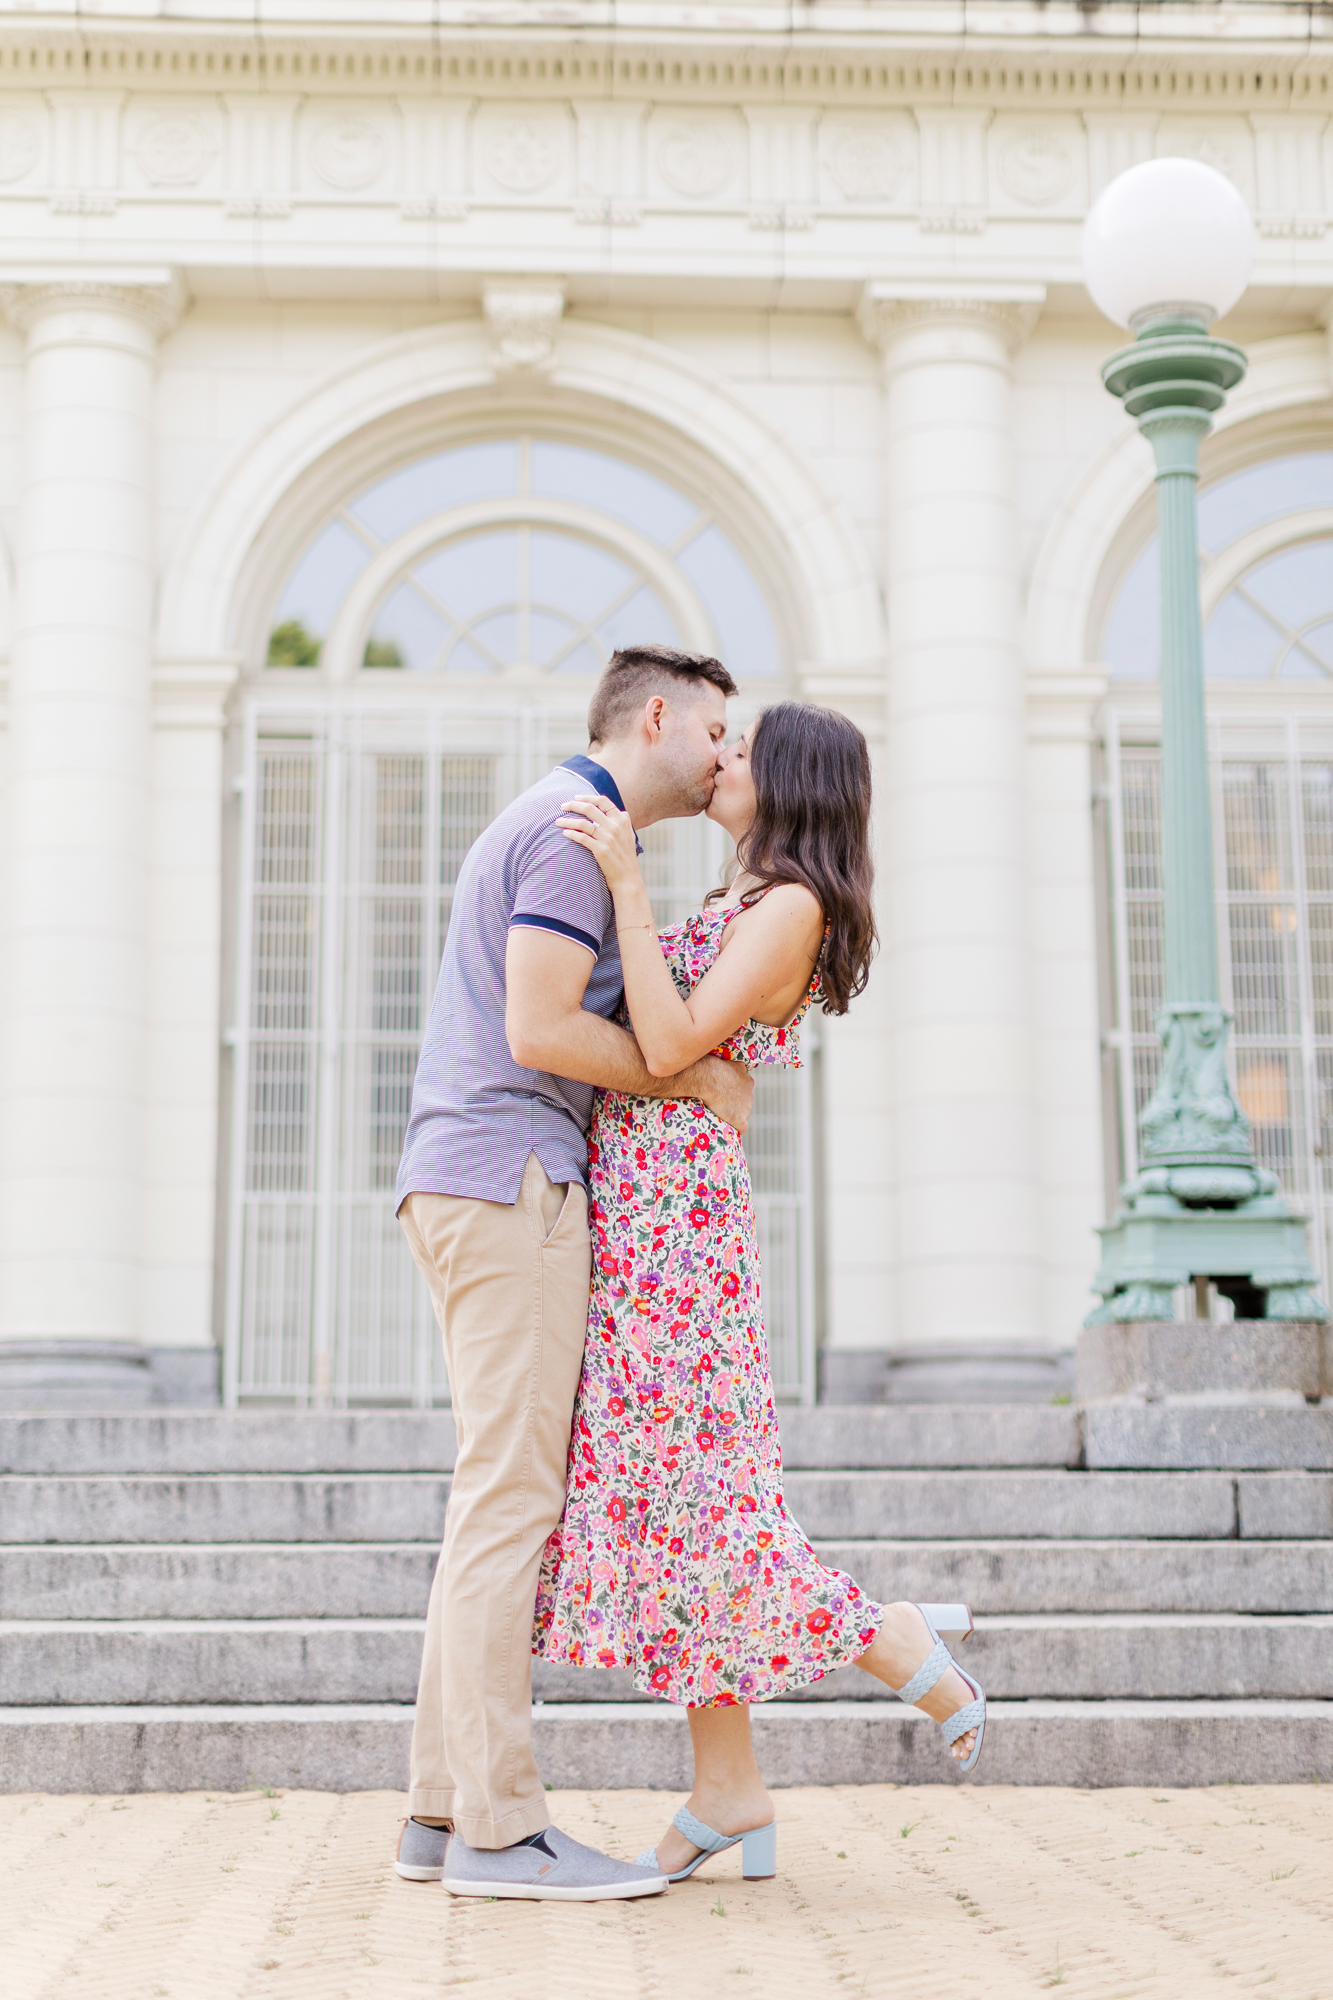 Sweet engagement session in Prospect Park